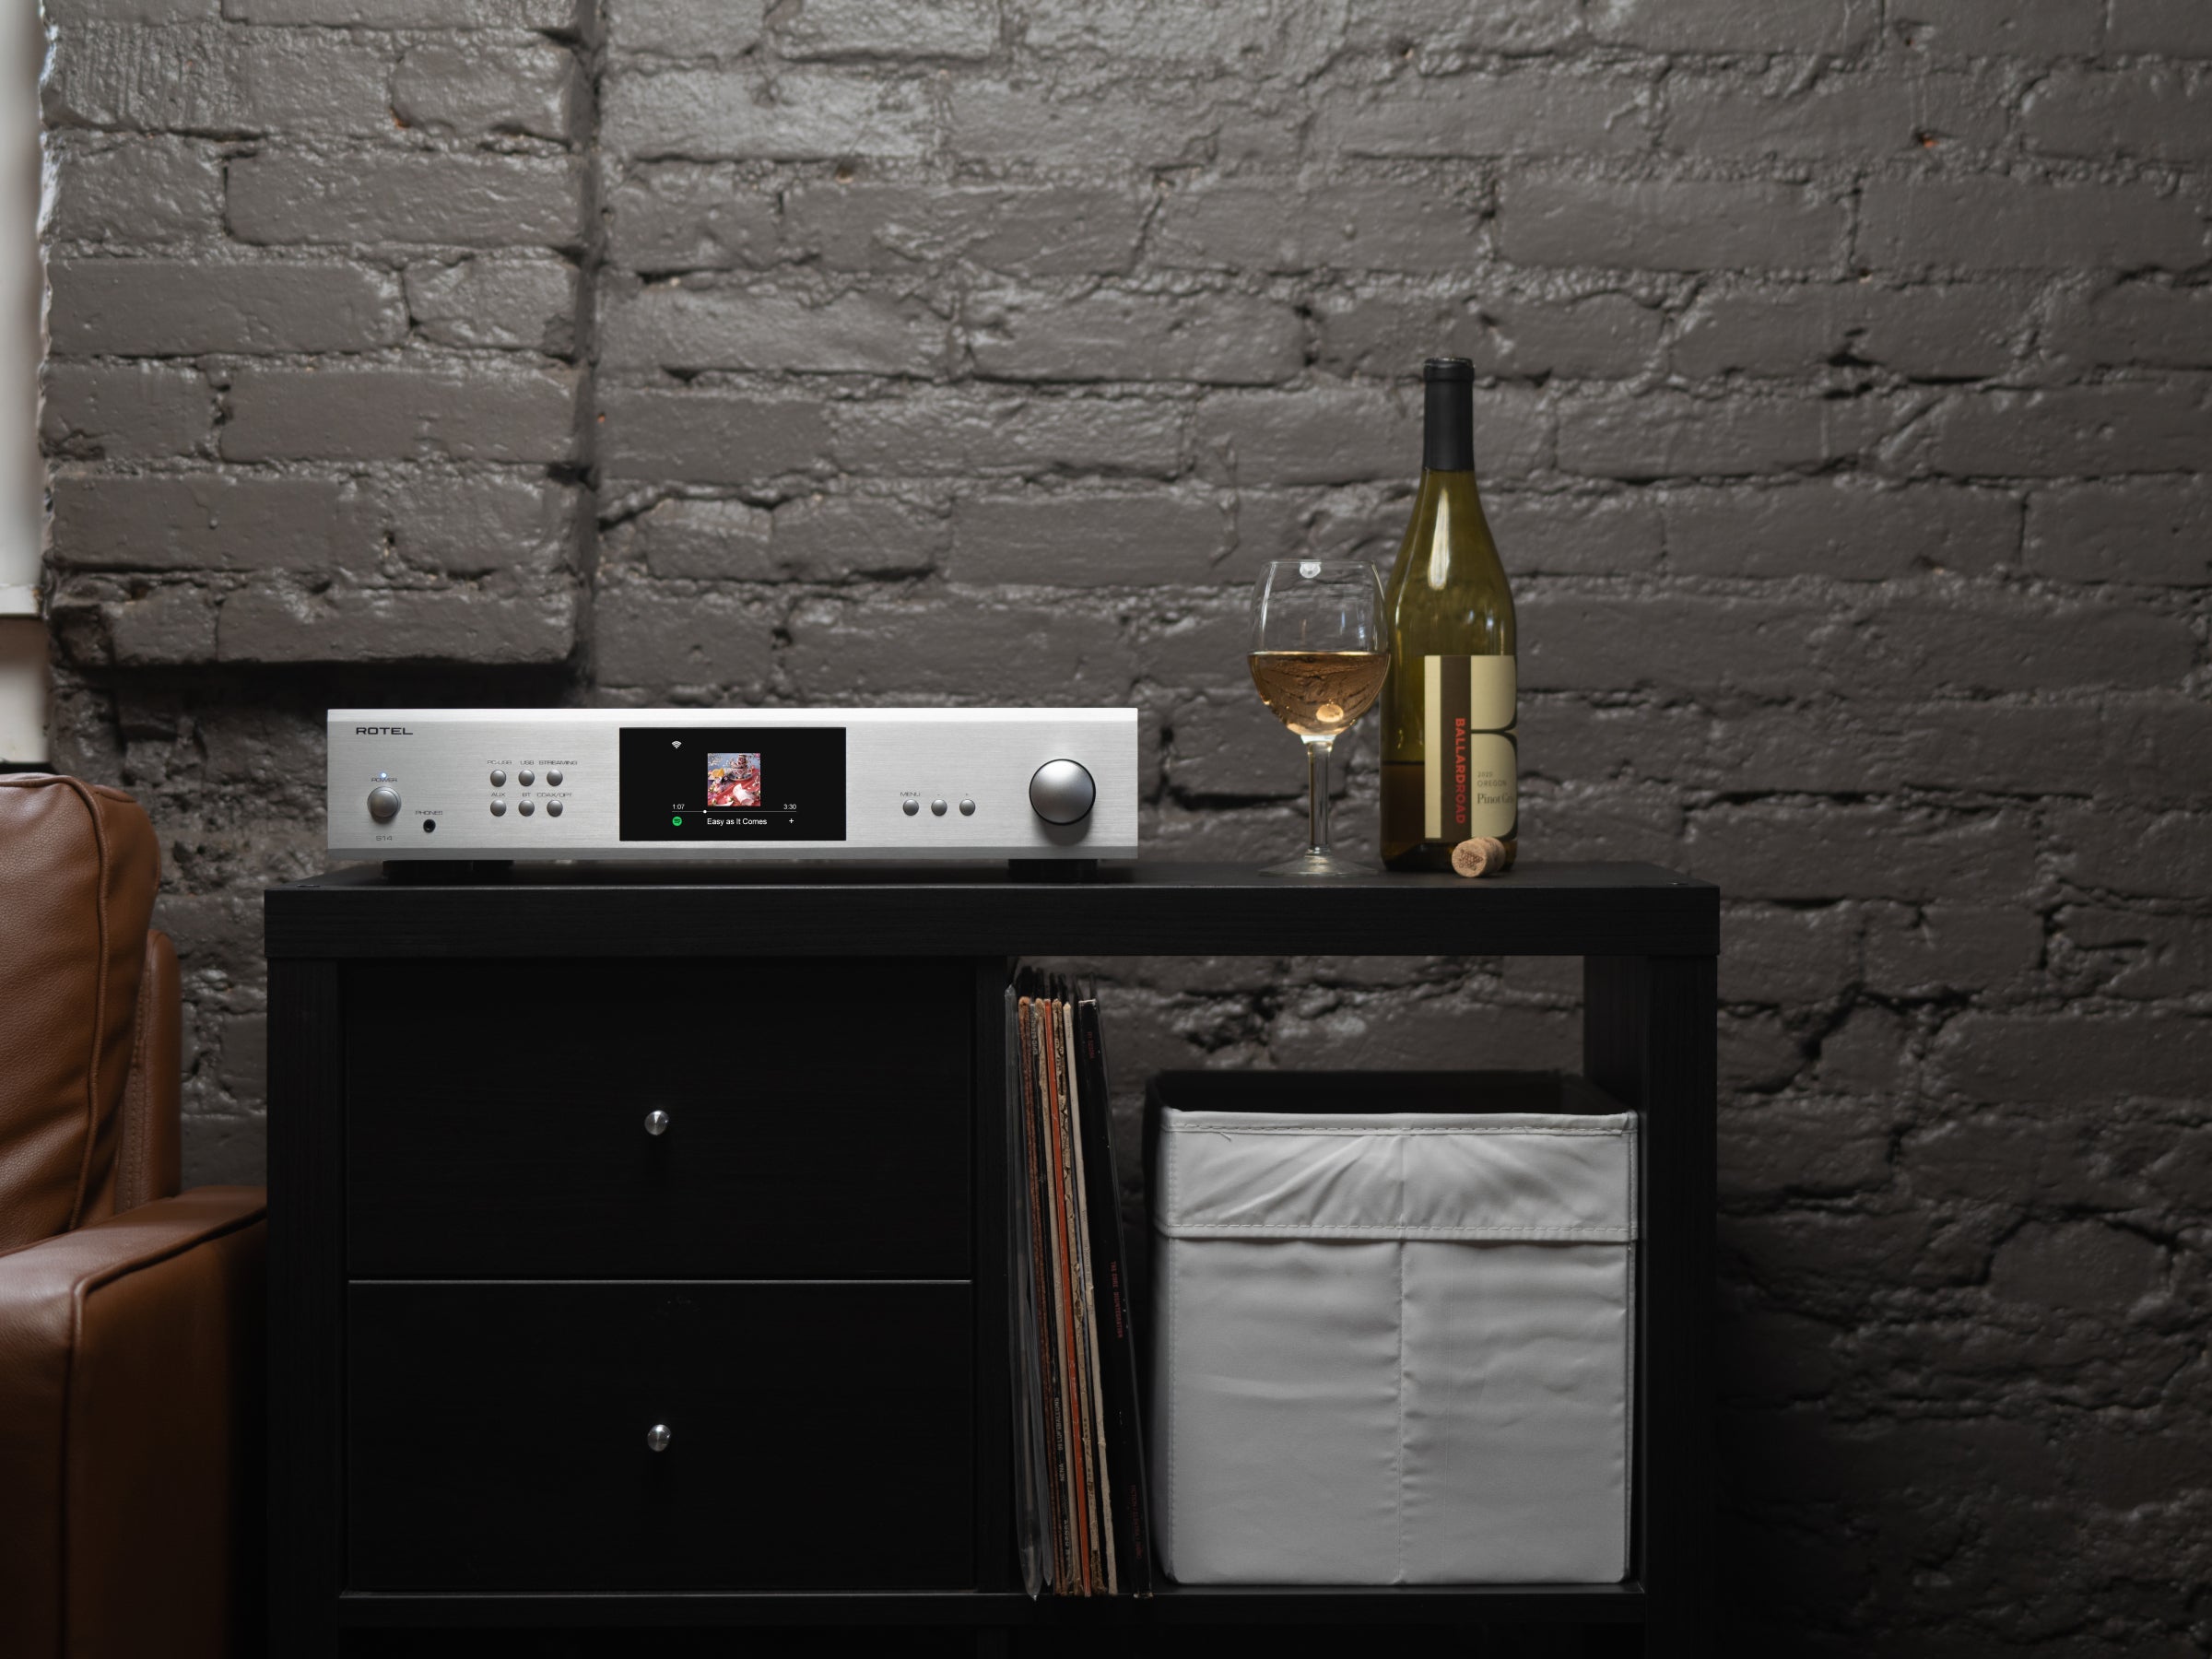 Rotel S14 Streaming Amplifier